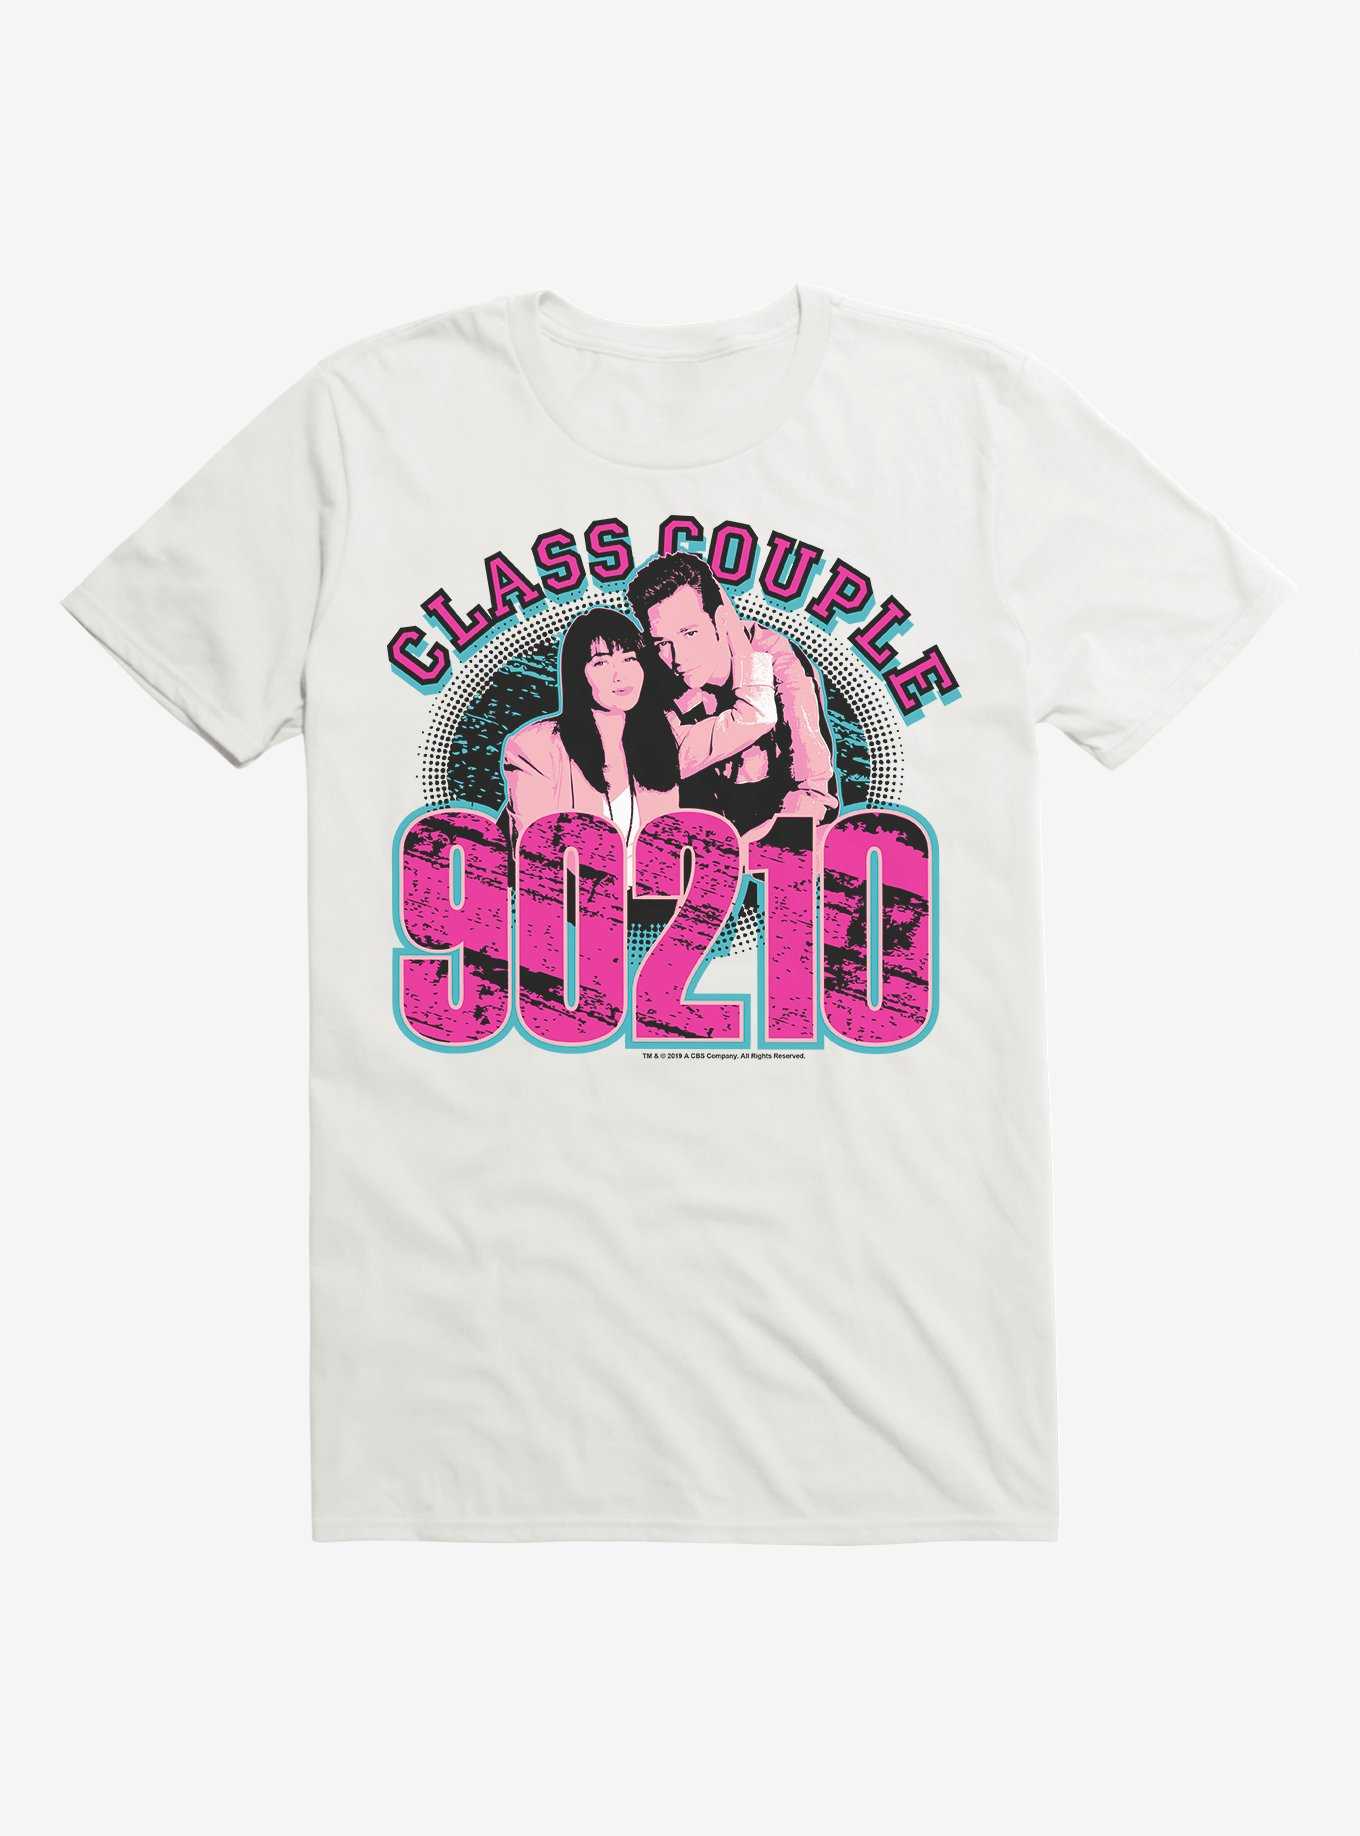 OFFICIAL 90210 T-Shirts & Merch | Hot Topic